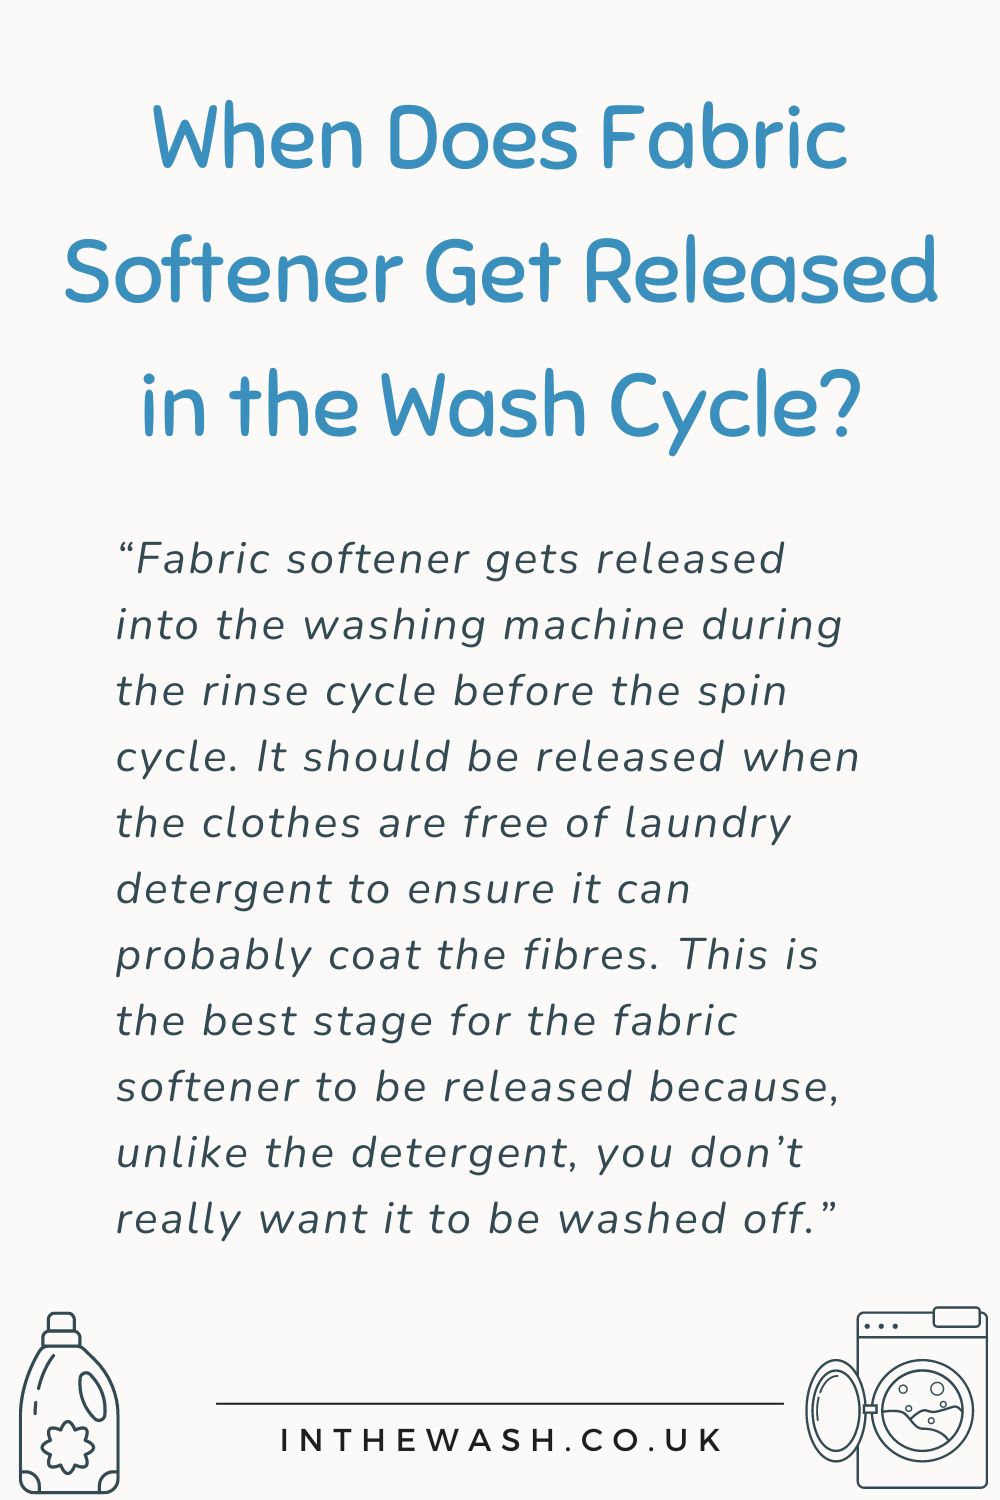 When does fabric softener get released in the wash cycle?